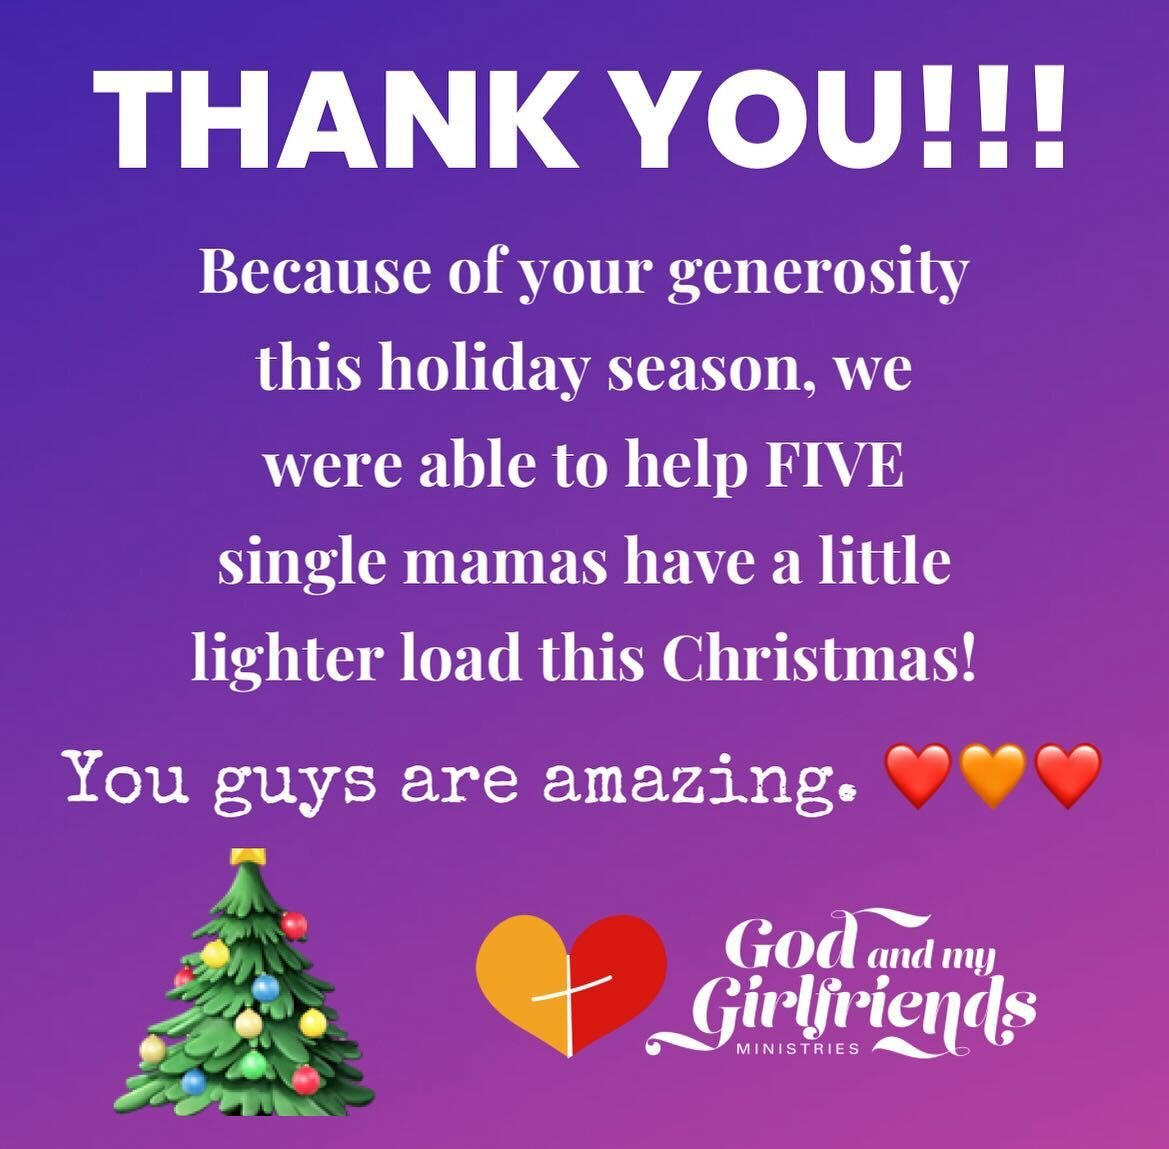 YOU DID IT!!!

This community is AMAZING! Because of your generosity, we were able to make our goal of raising $5,000 to bless several hard-working Single Moms this Christmas. THANK YOU, THANK YOU, THANK YOU! 

If you are on our mailing list, you&rsq